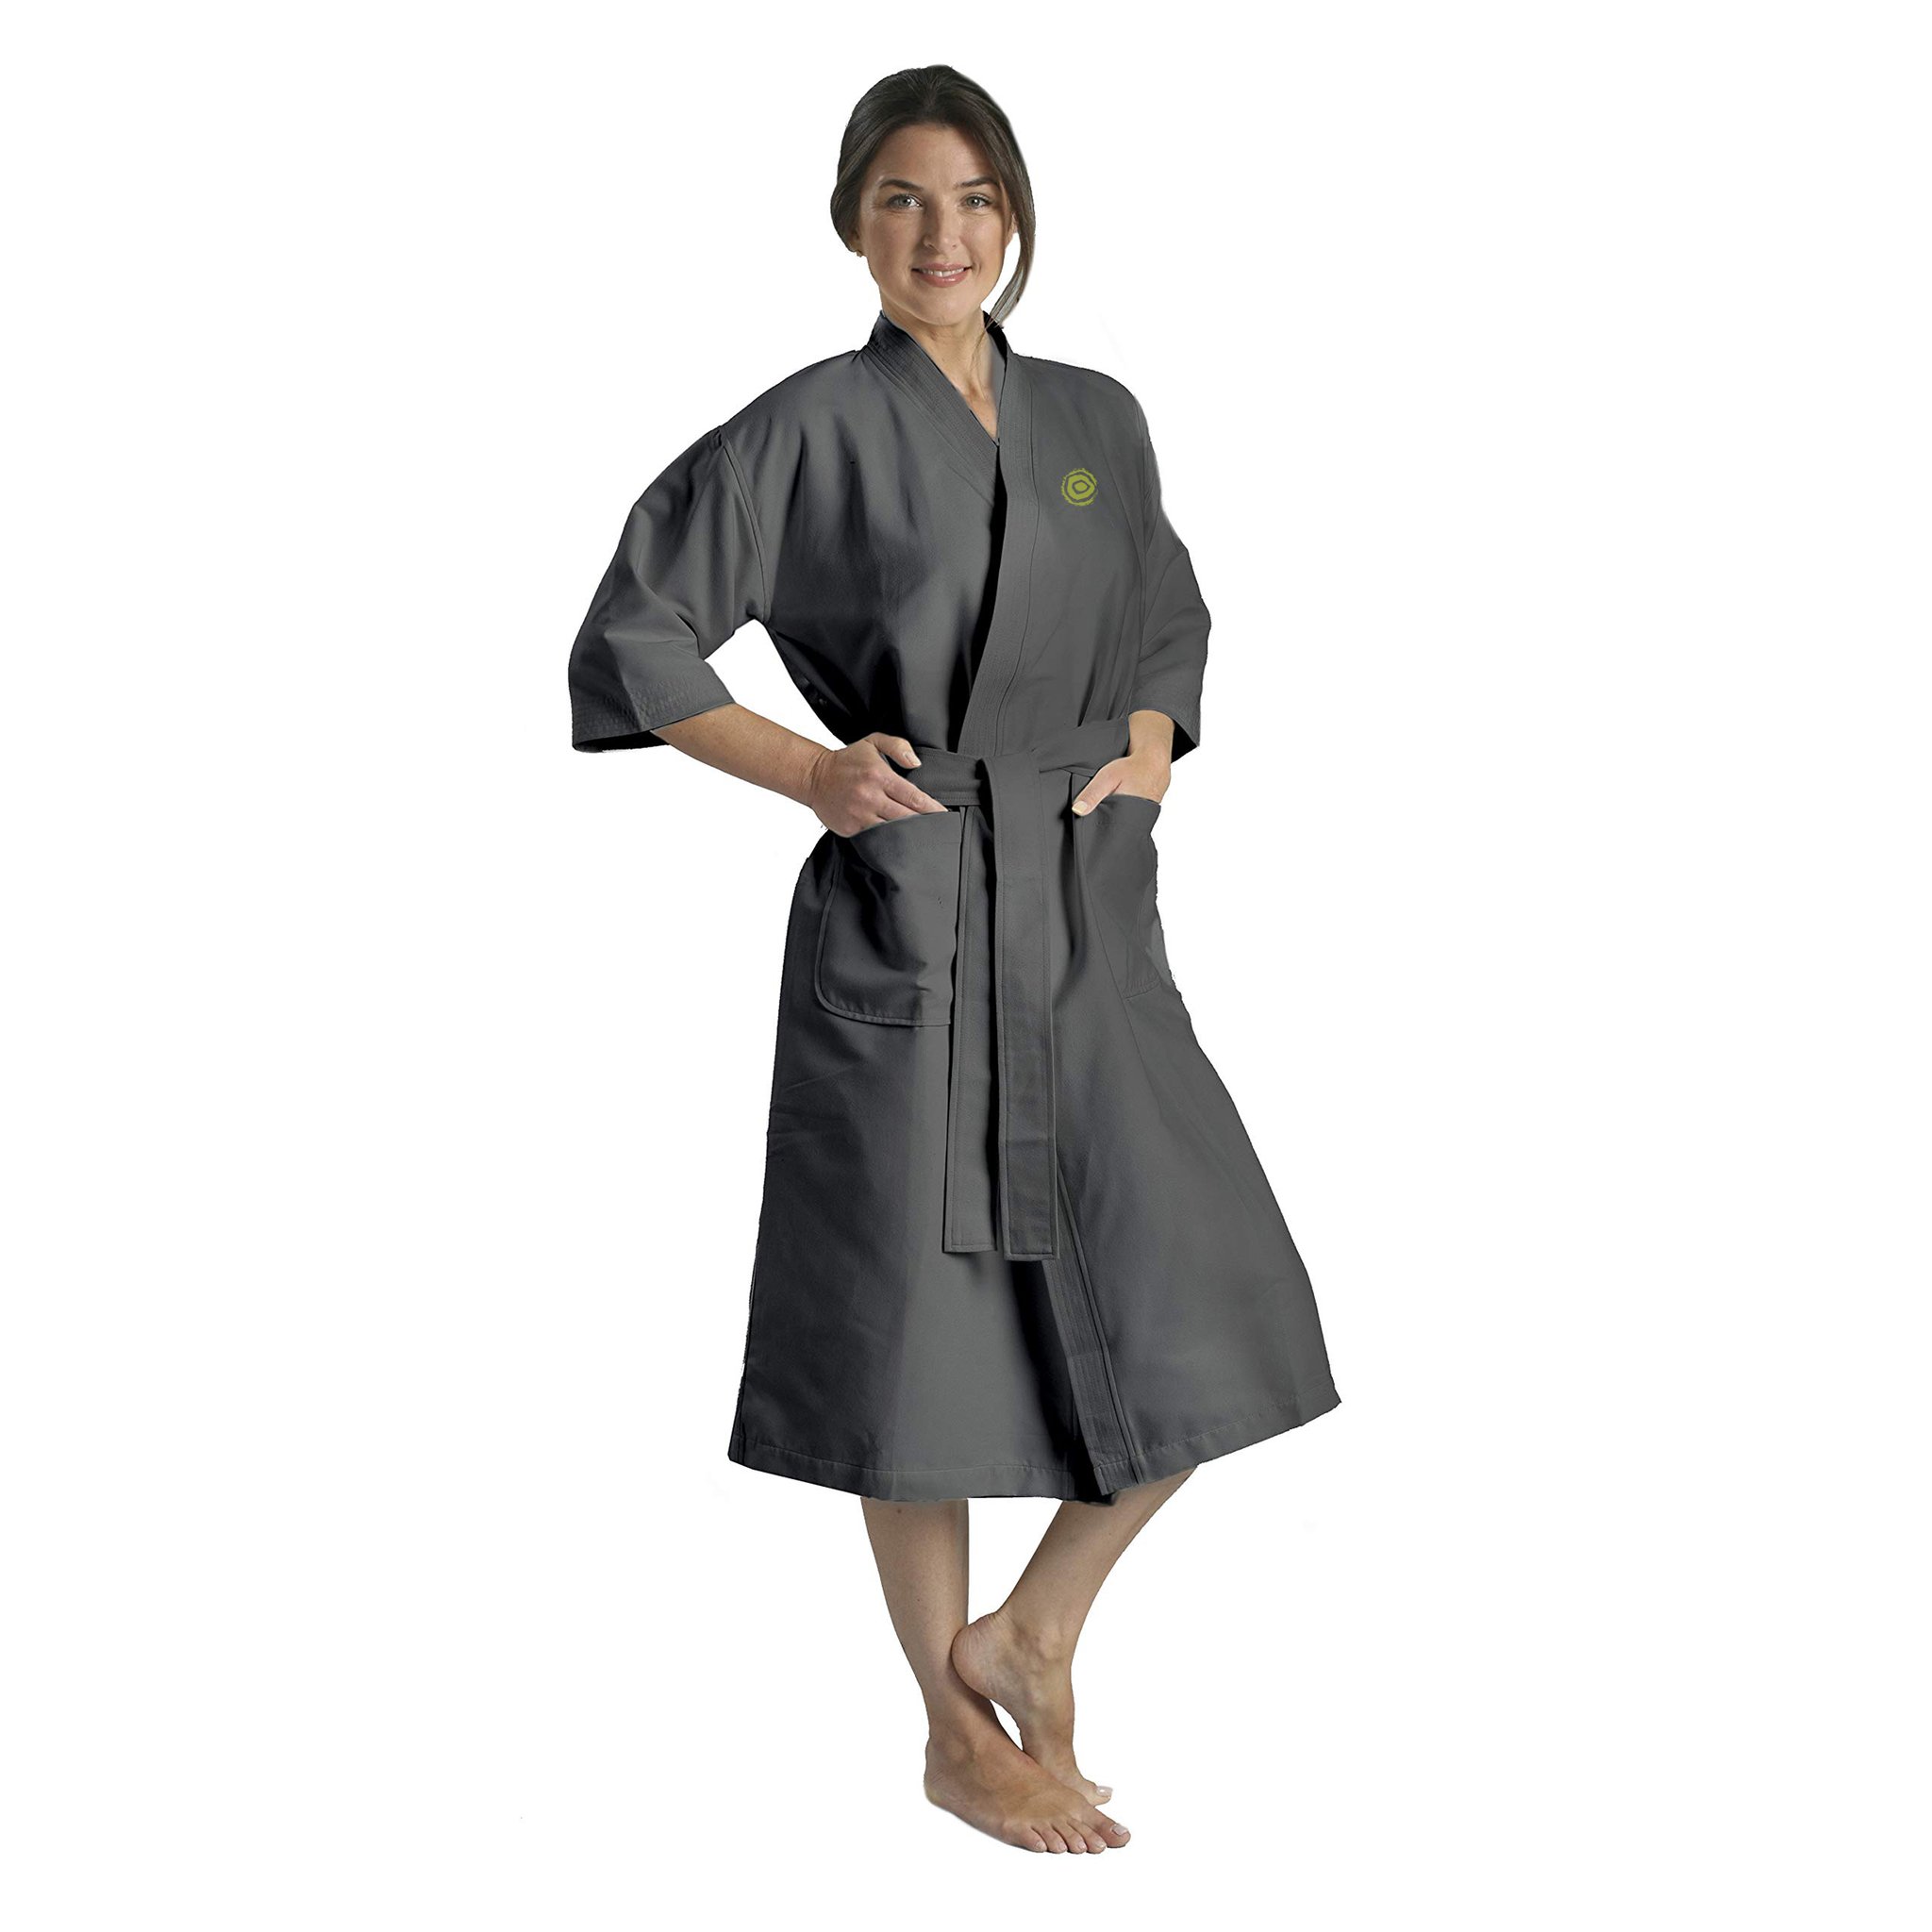 Woman in a grey bathrobe with pockets and her hands in the pockets